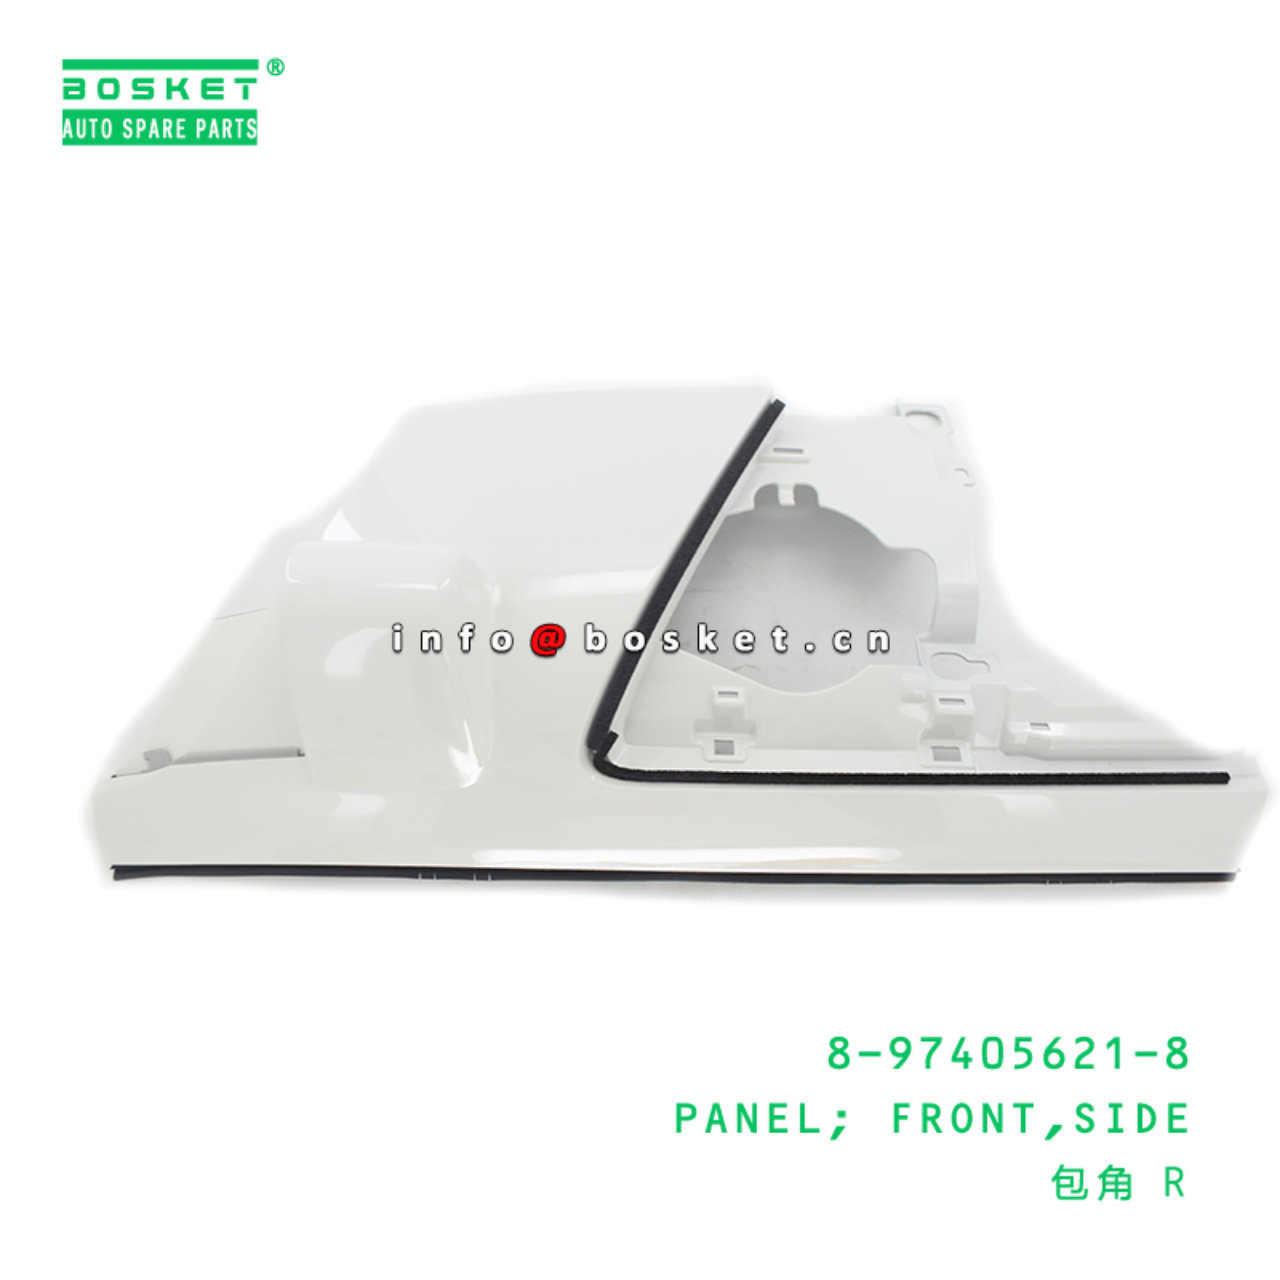 8-97405621-8 Side Front Panel 8974056218 Suitable for ISUZU NLR85